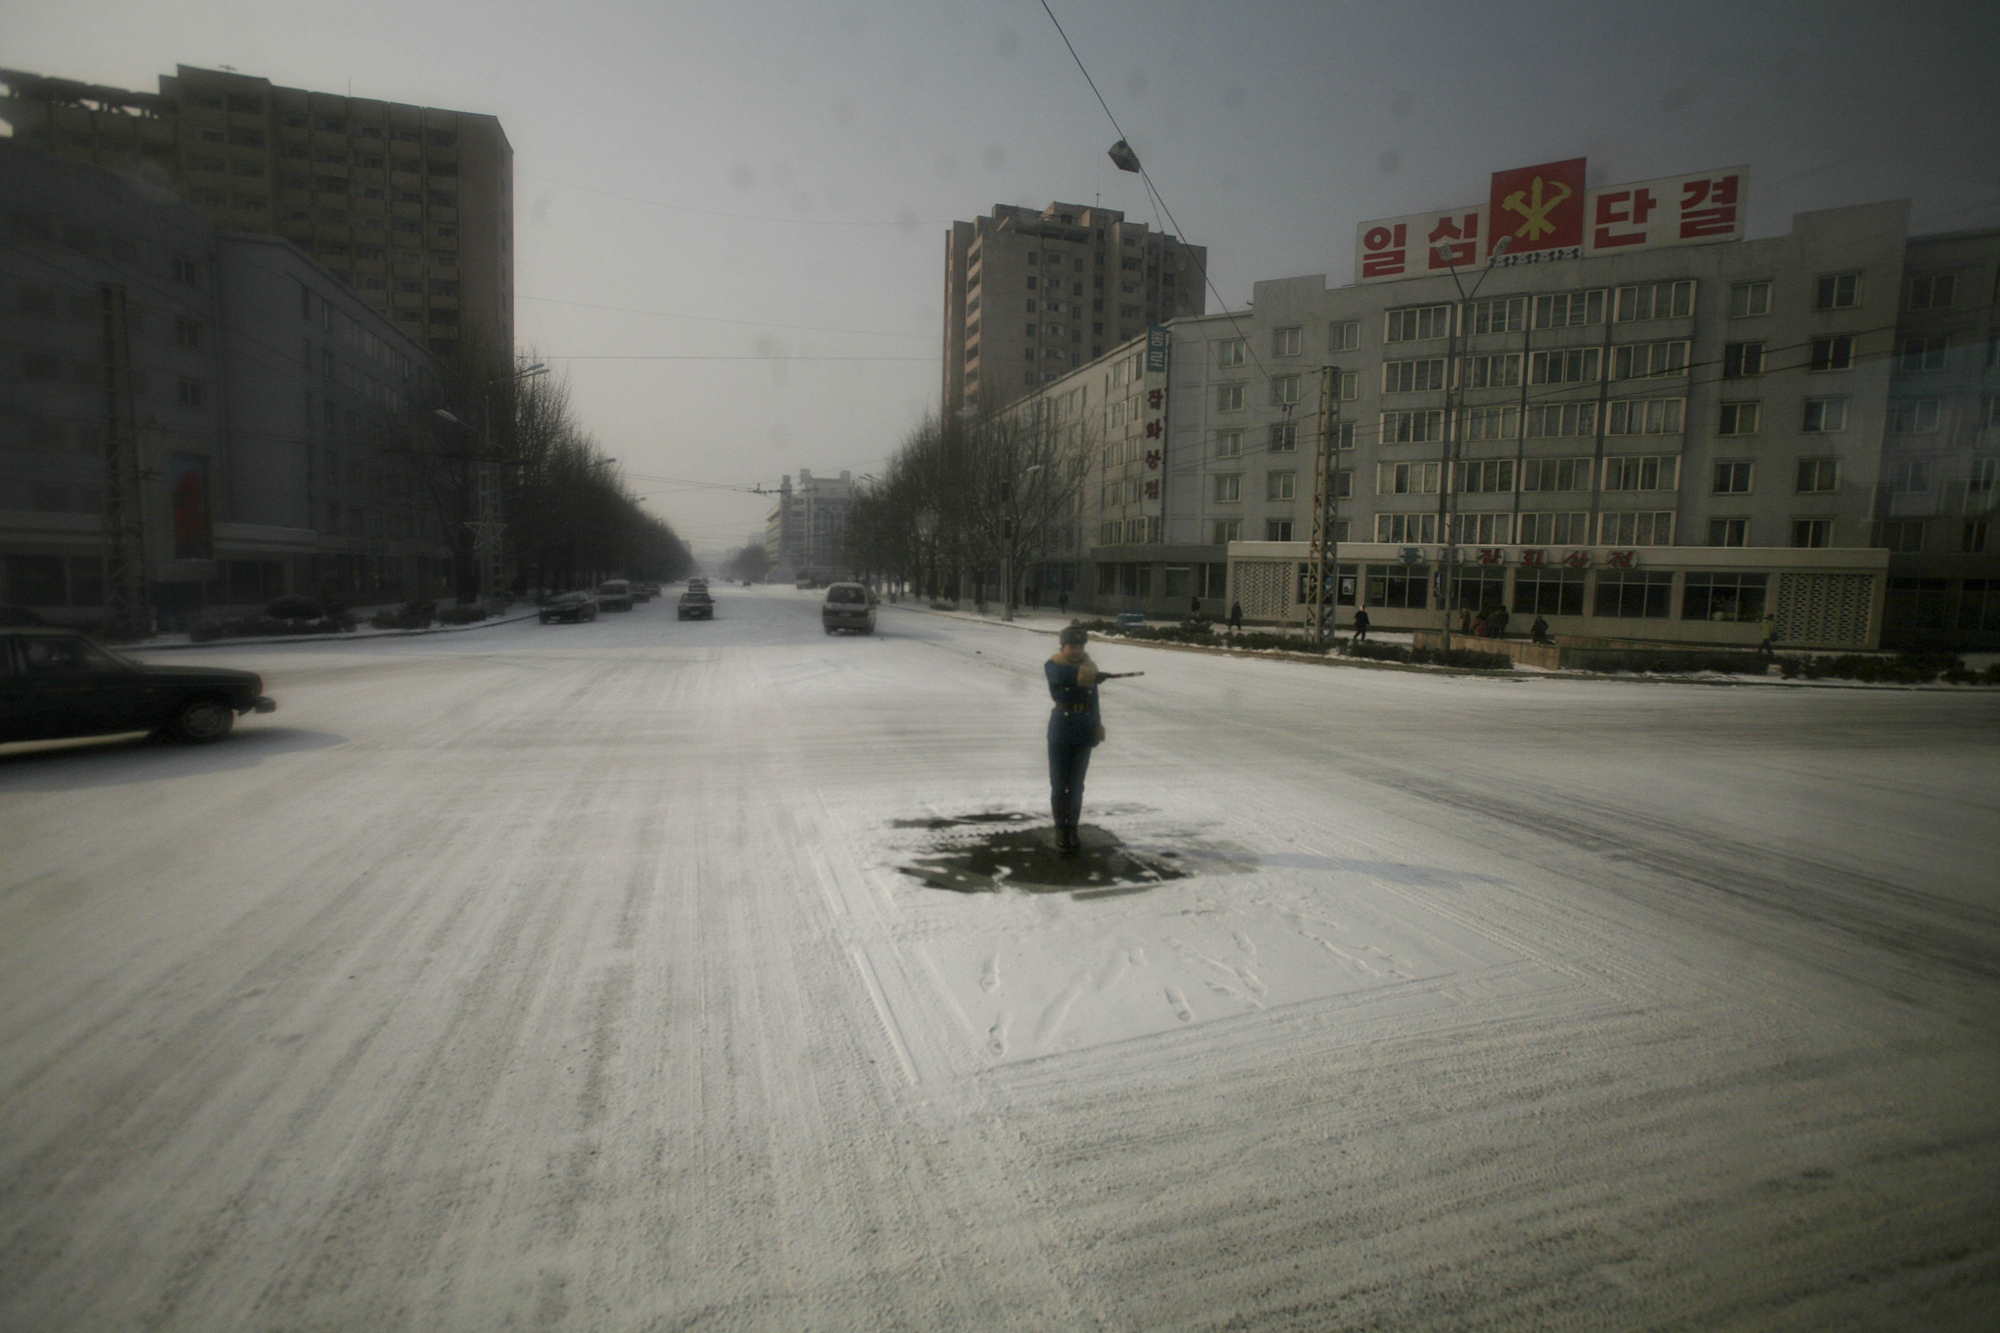 A traffic guard stands in the center of a snowy street in Pyongyang, North Korea on Feb. 26, 2008.